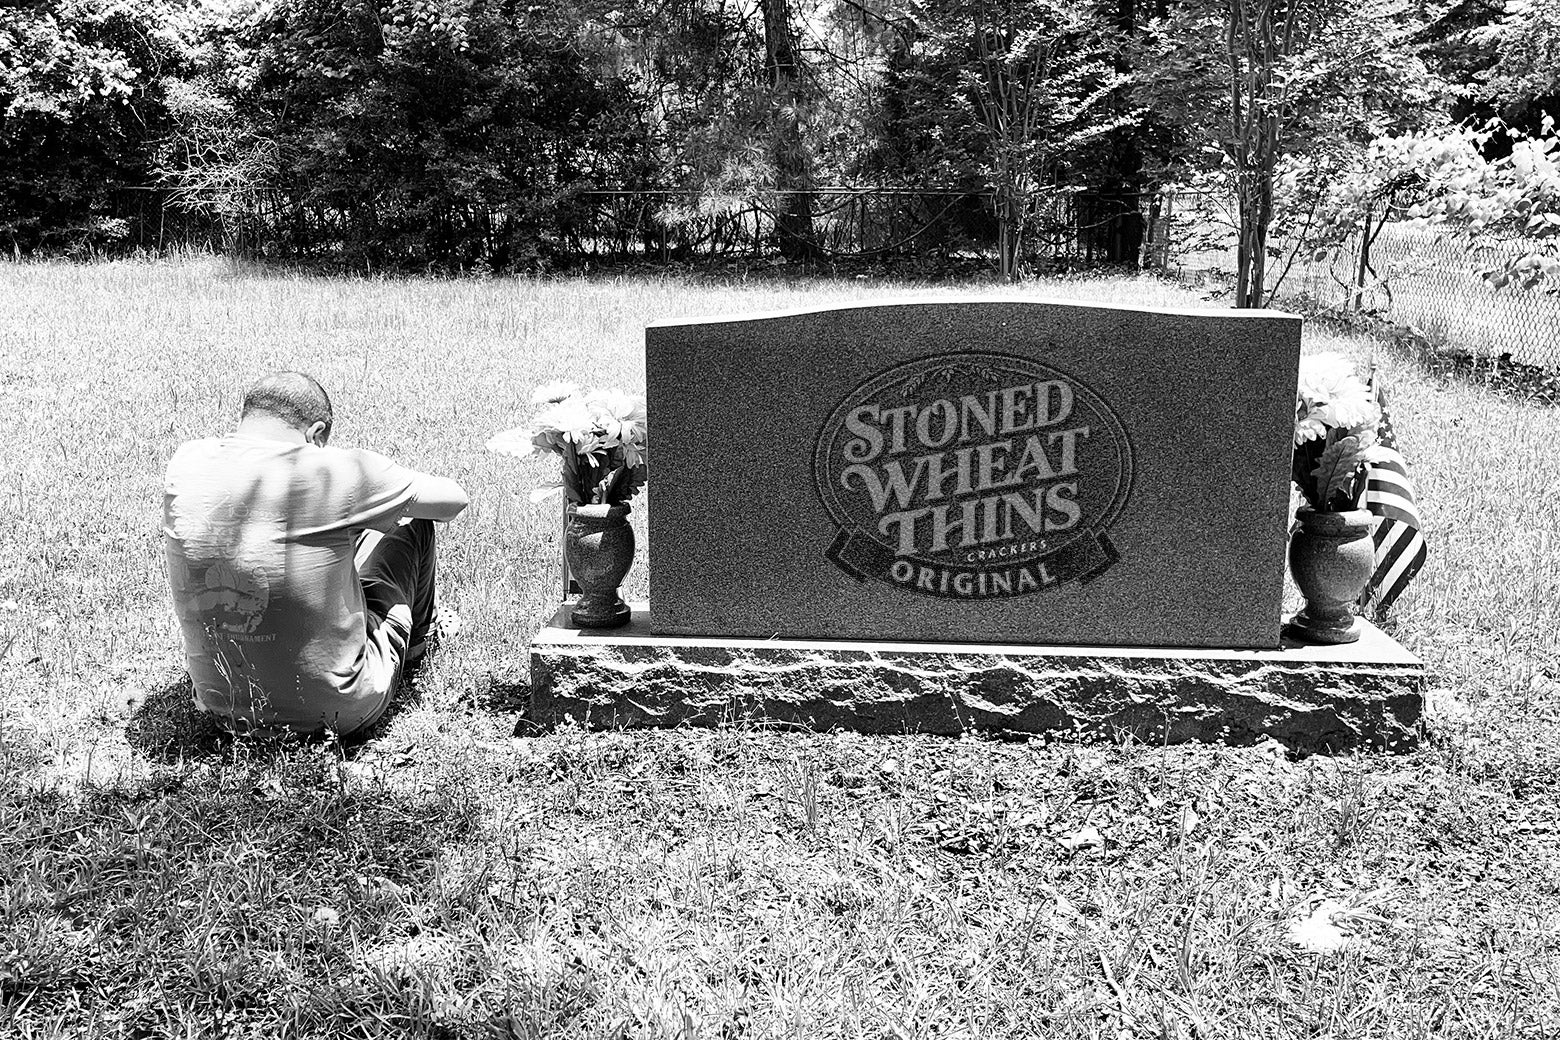 A man grieving on the ground at a cemetery next to a Stoned Wheat Thins tombstone.